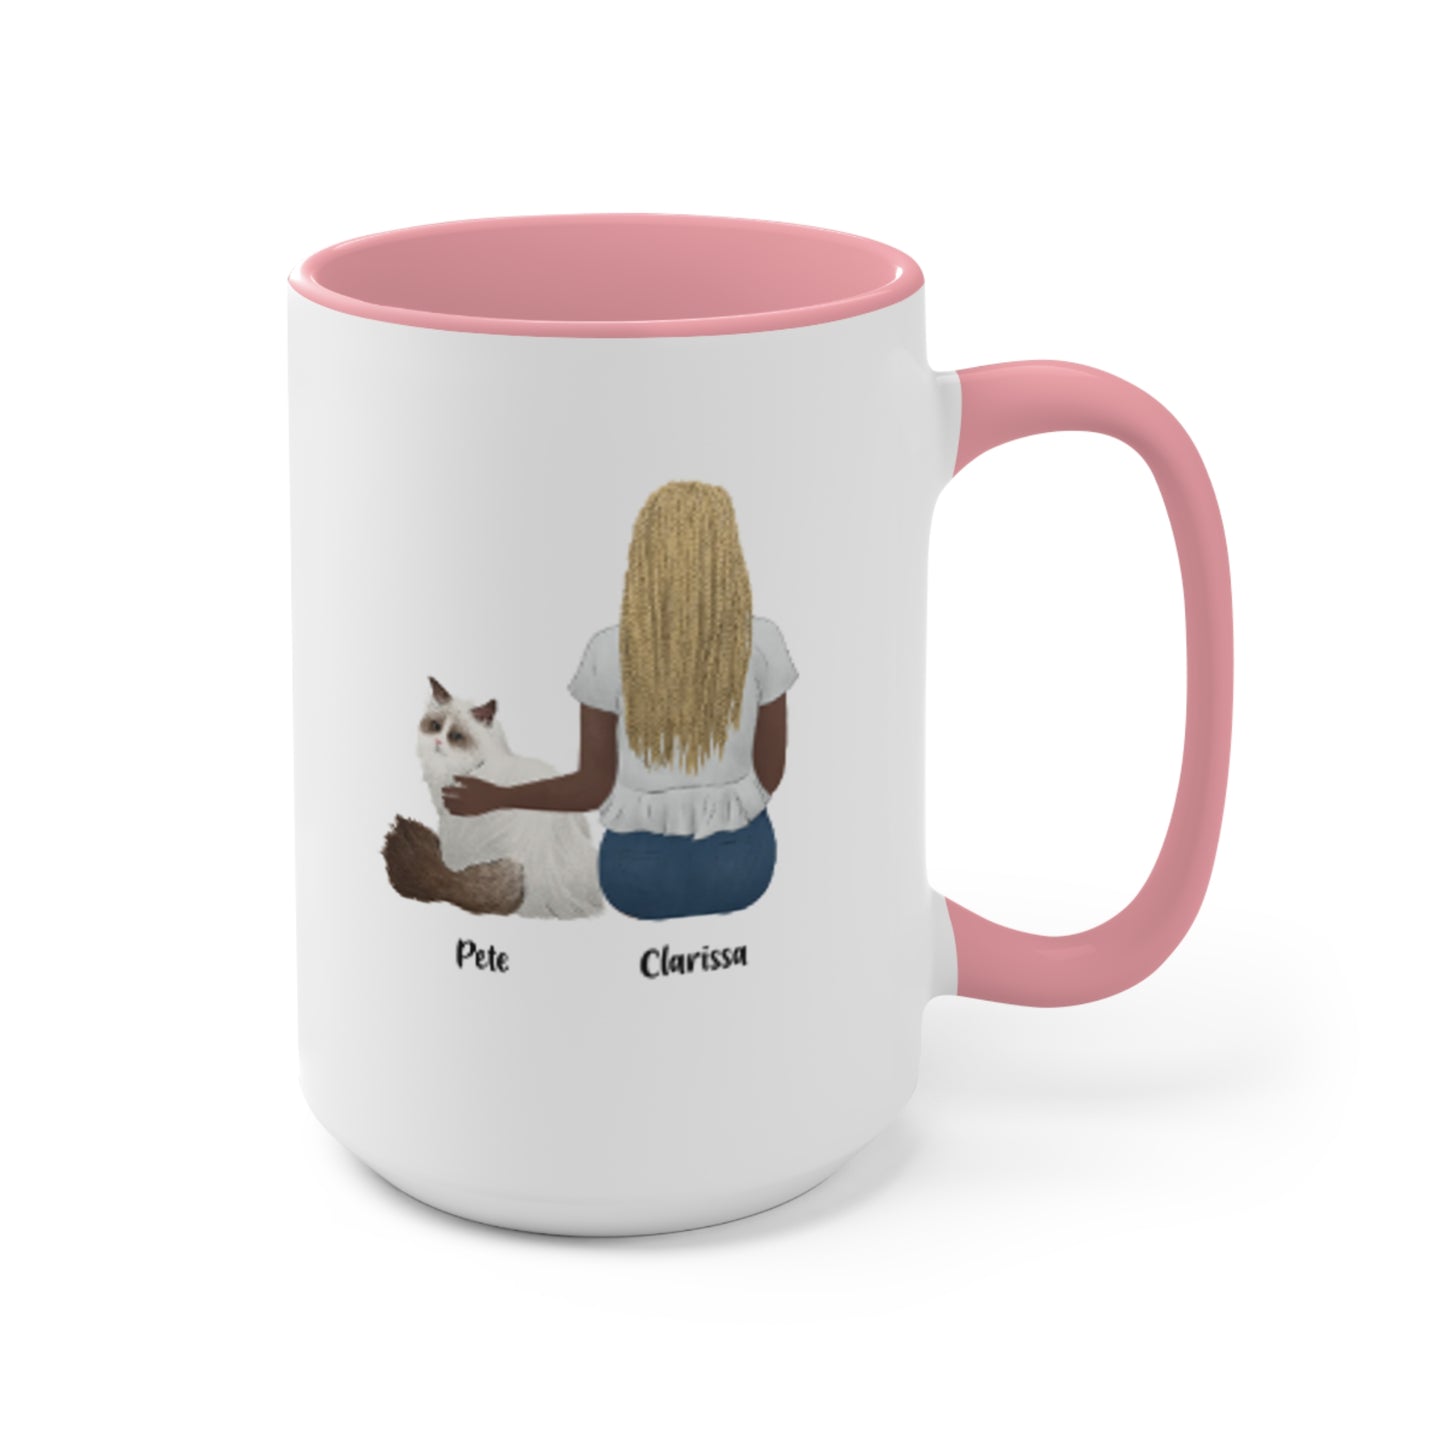 Personalized Coffee Mugs, 15oz - All I need is Coffee & my Kitty! (Customize in Store with live preview)